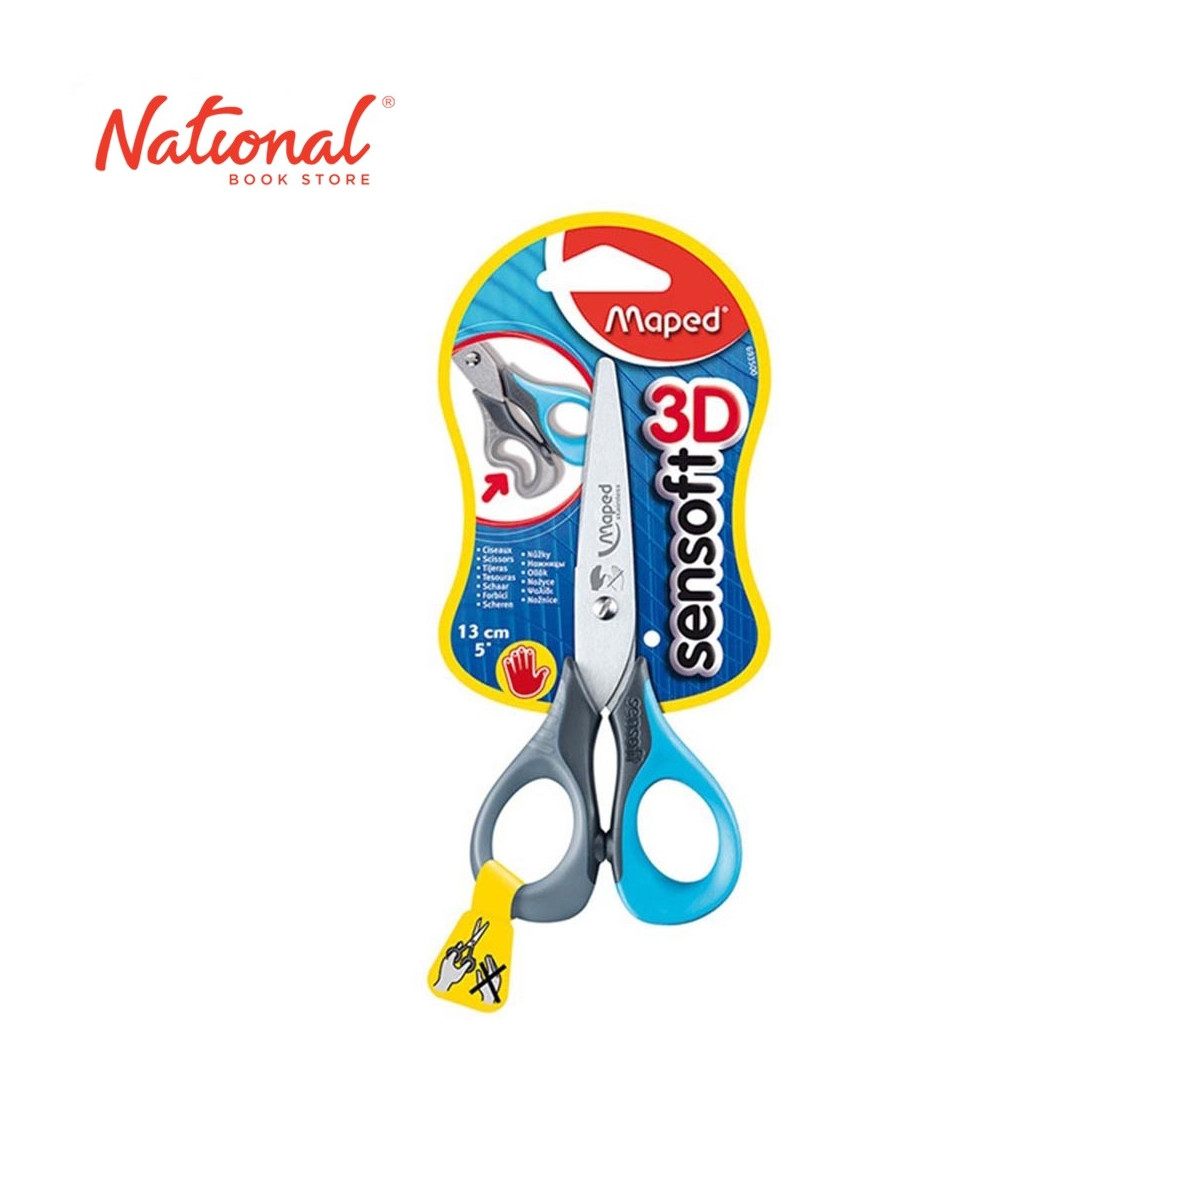 MAPED KIDDIE SCISSORS 693500 5IN BLUNT SENSOFT BLUE AND GRAY COMBINATION COLOR